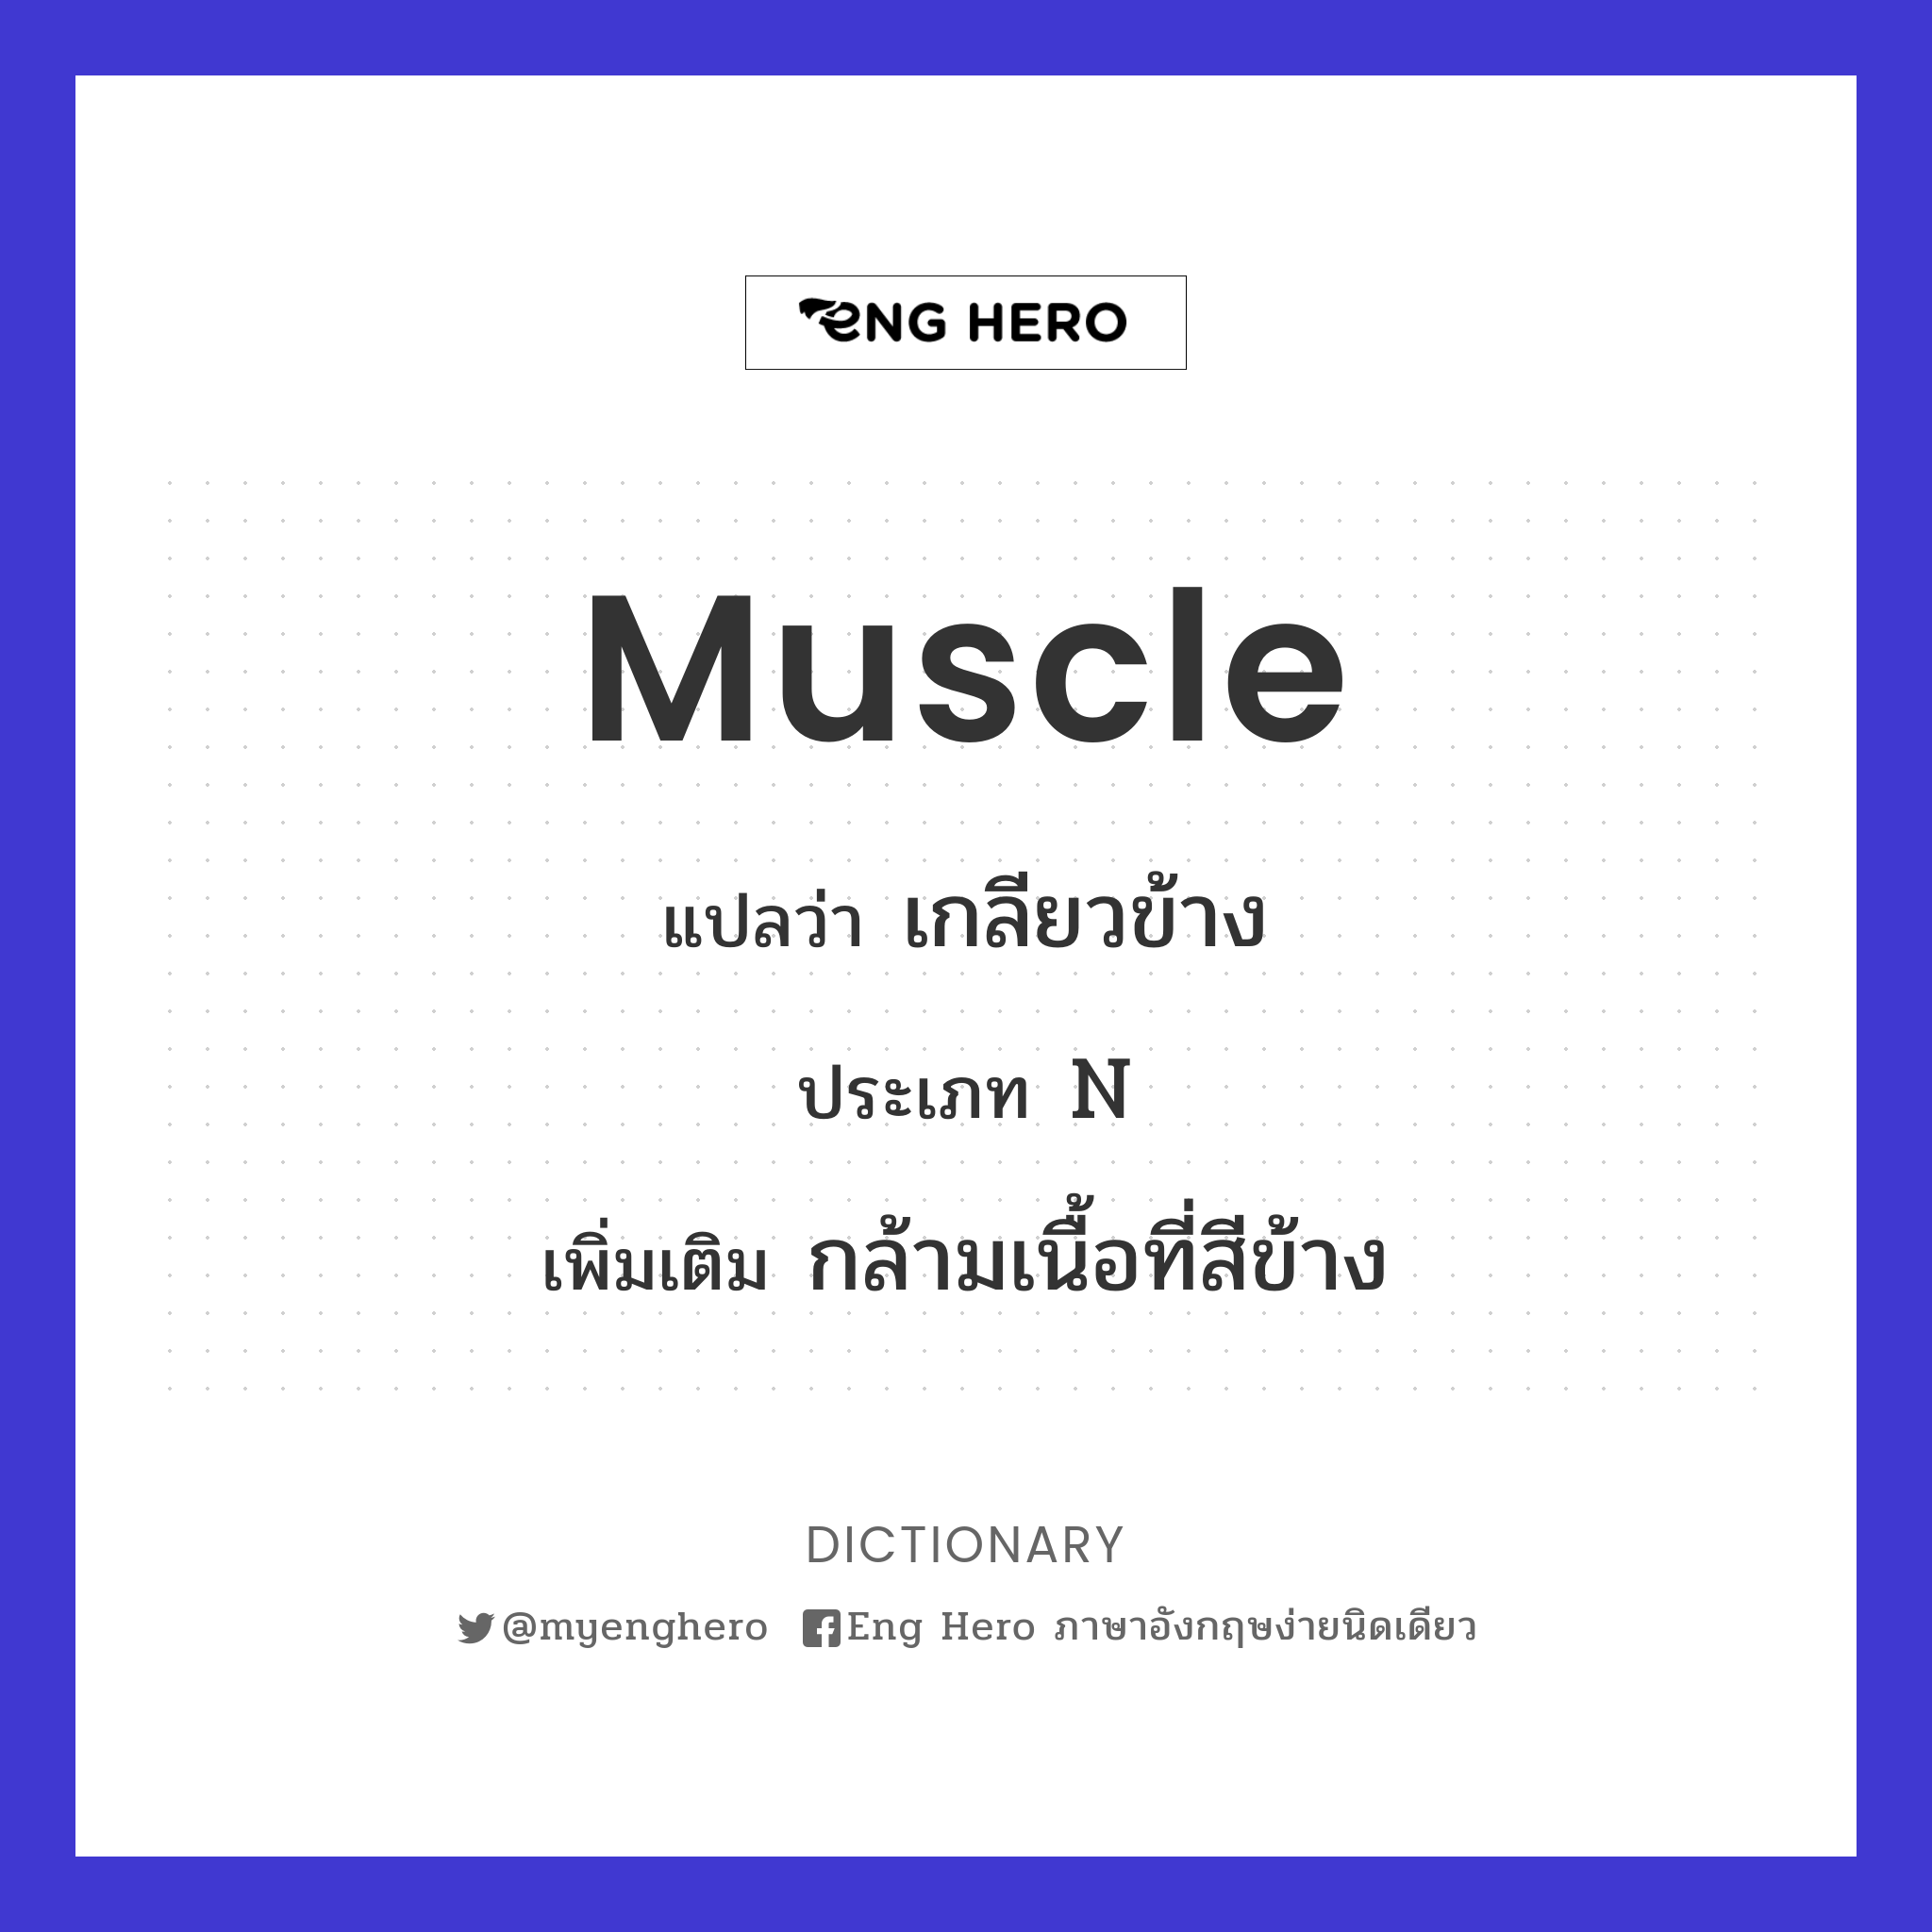 muscle